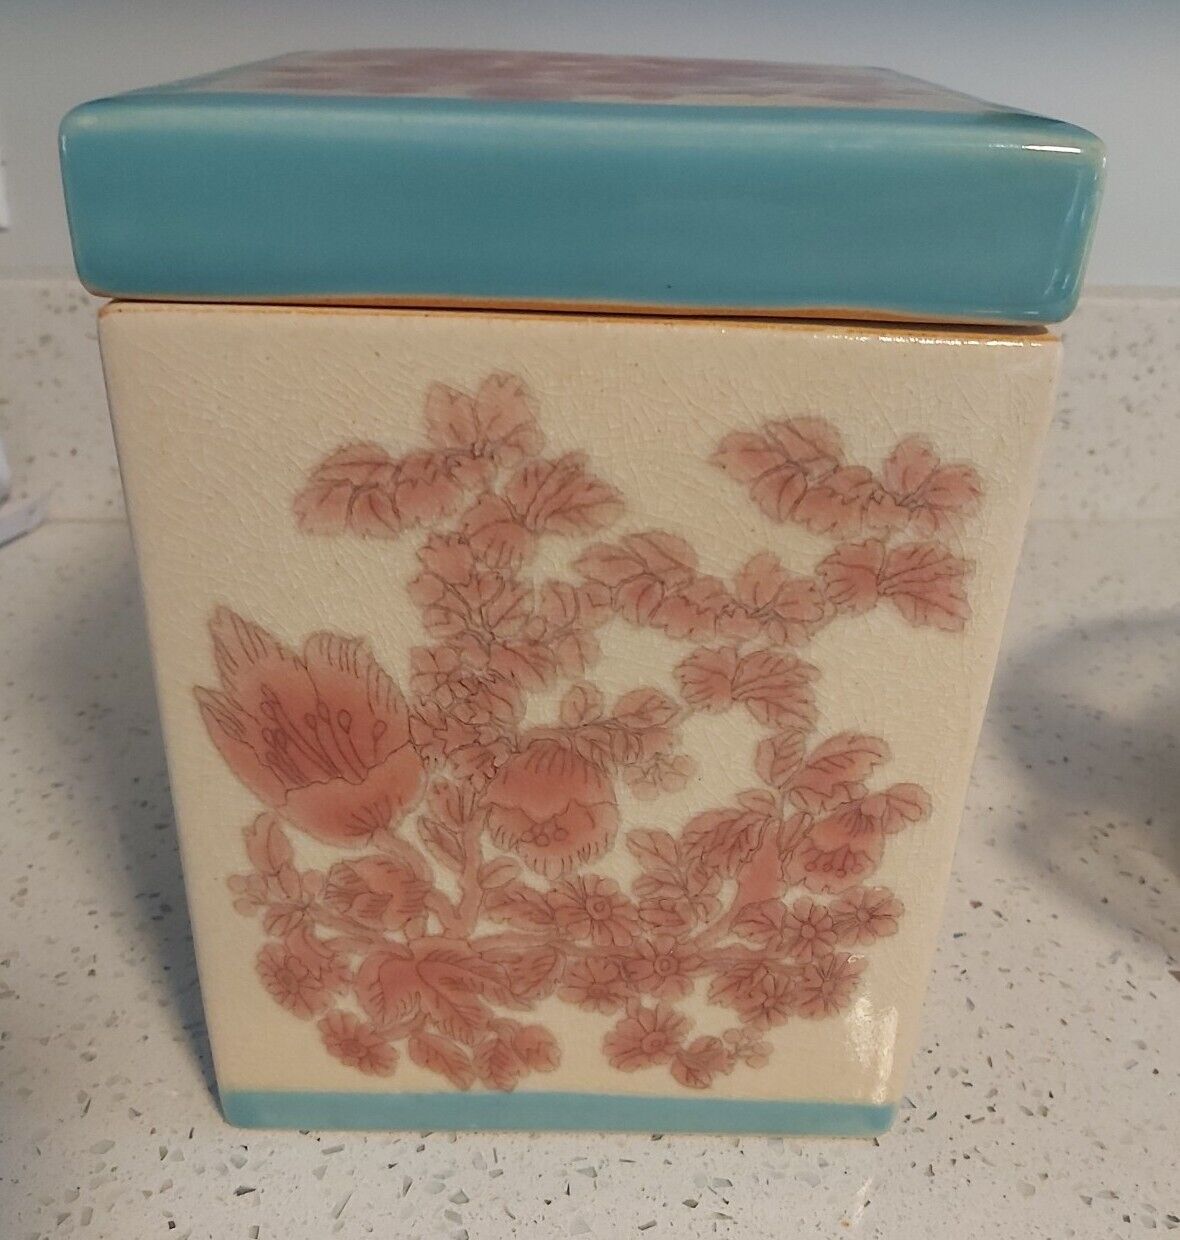 Pier 1 Canister Storage Square Ceramic Pink Floral Turquoise Kitchen Bathroom